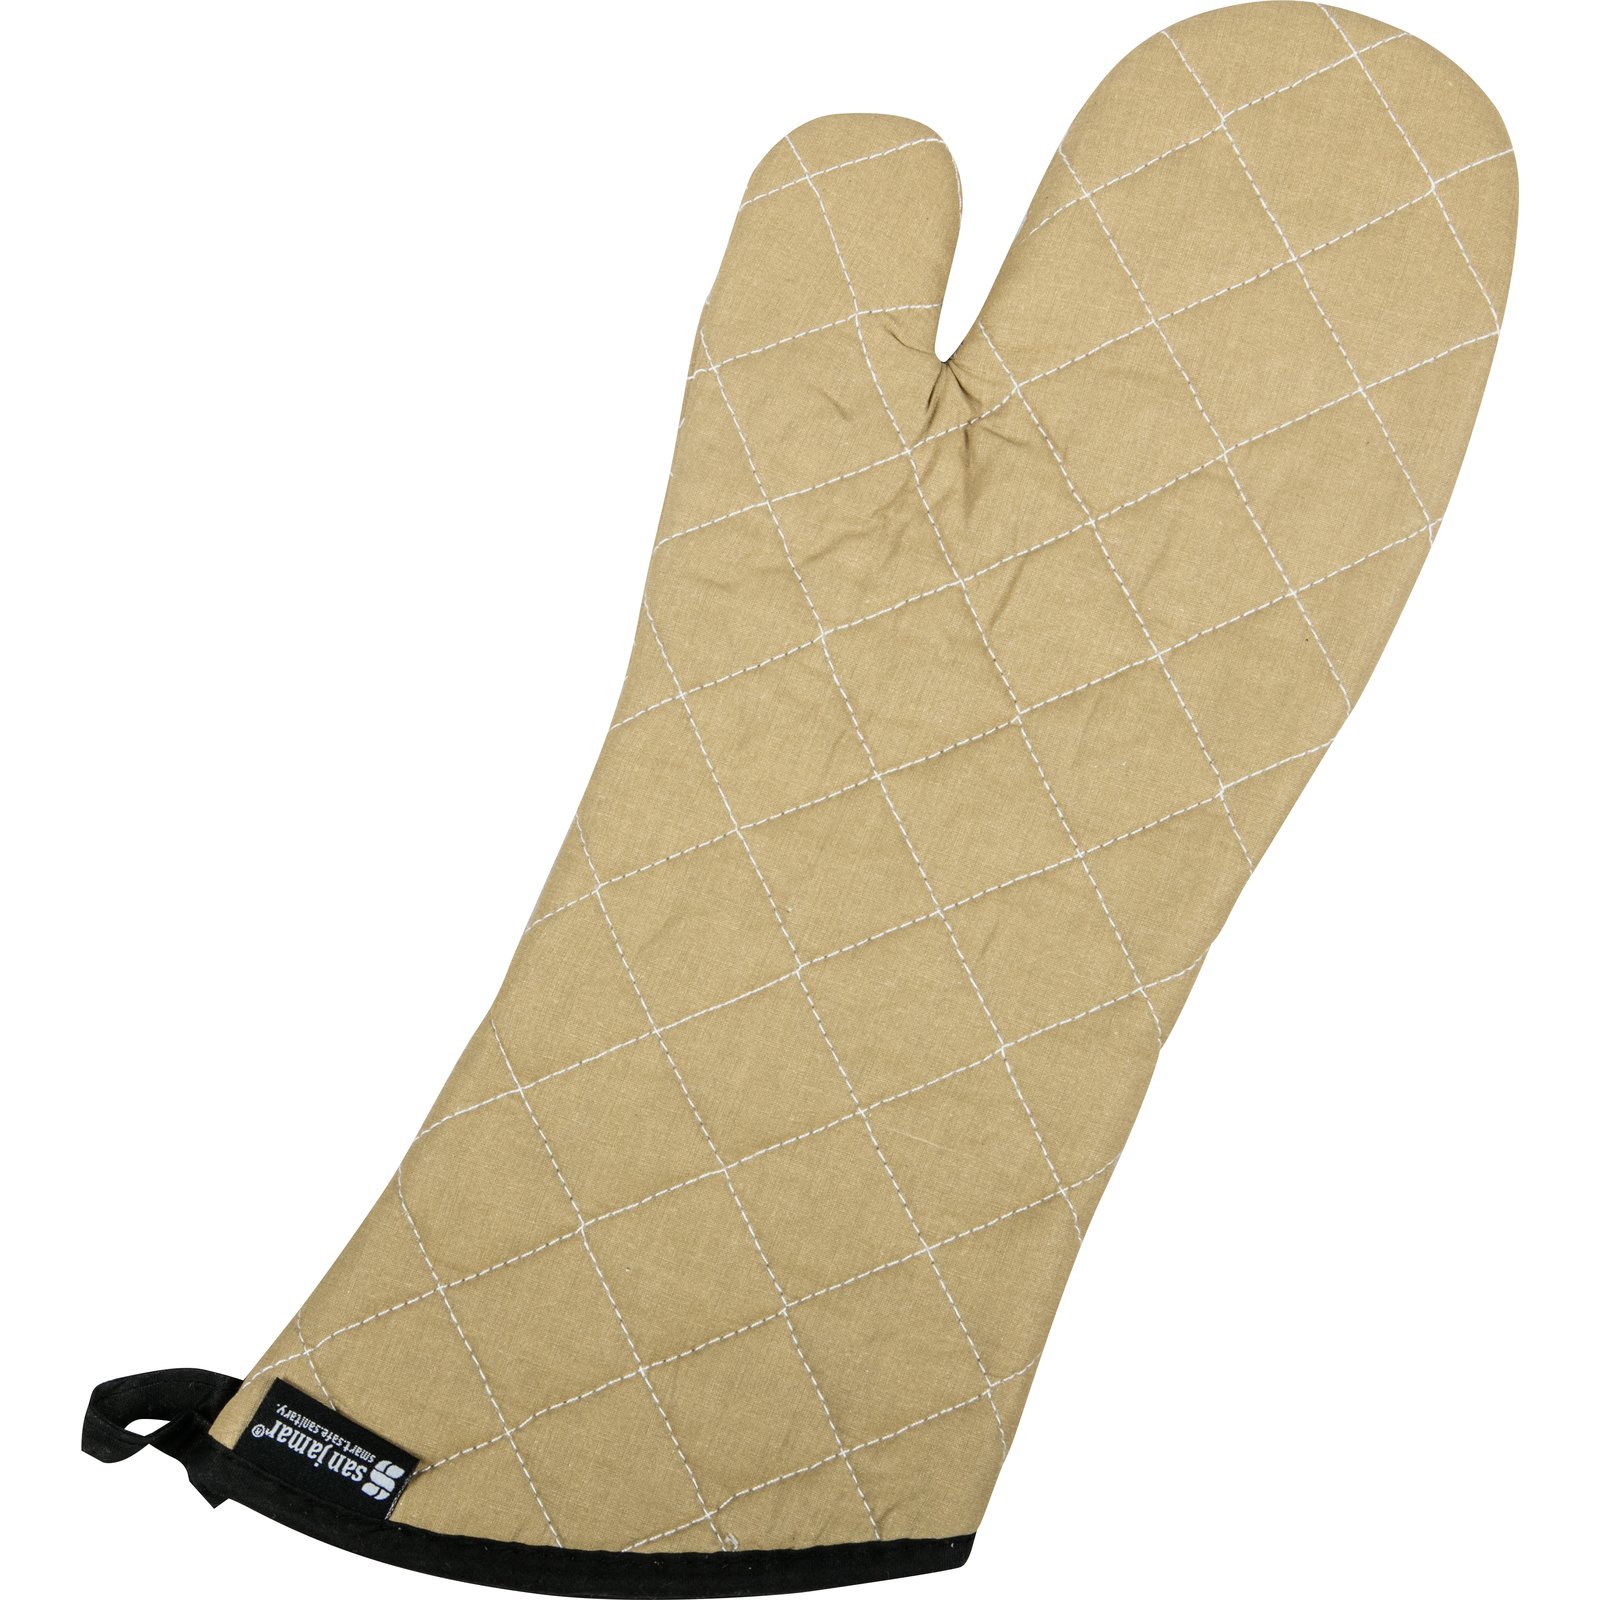 17 Flame Resistant Oven Mitt - My Tools for Living℠ Retail Store